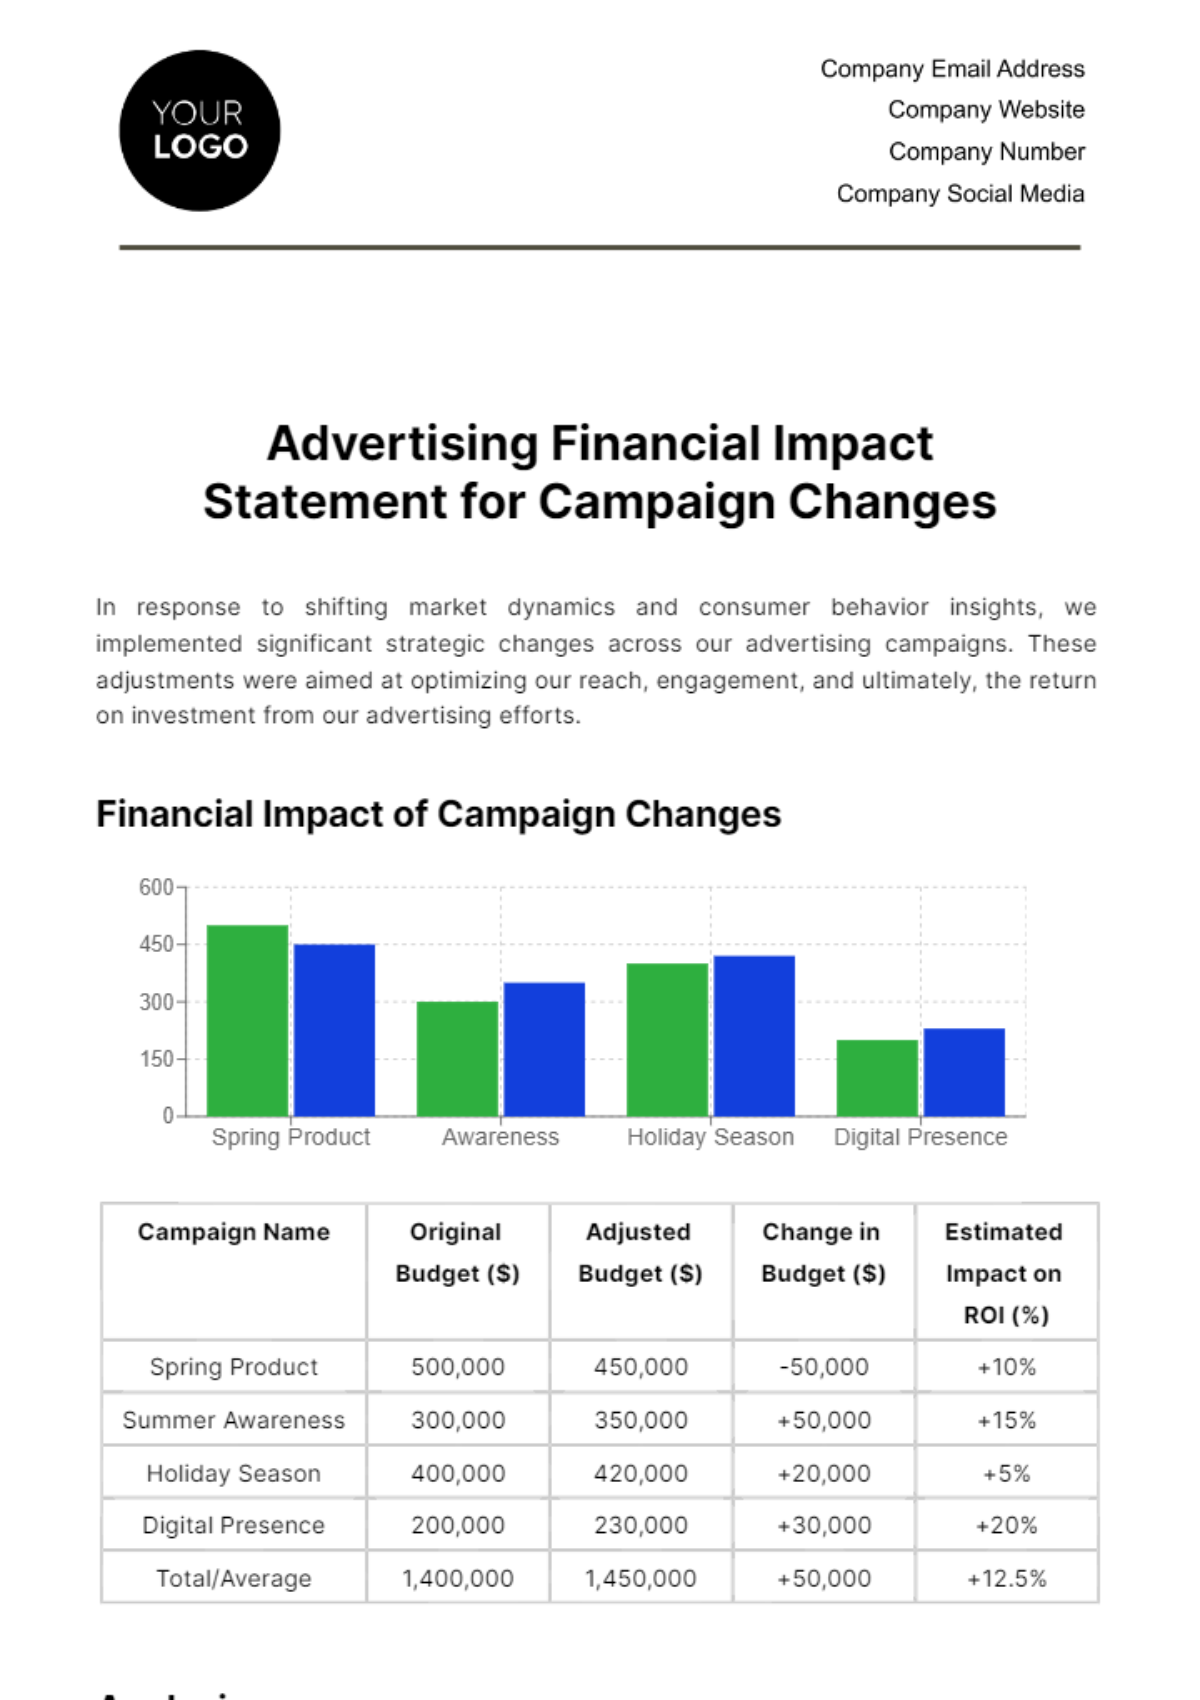 Free Advertising Financial Impact Statement for Campaign Changes Template